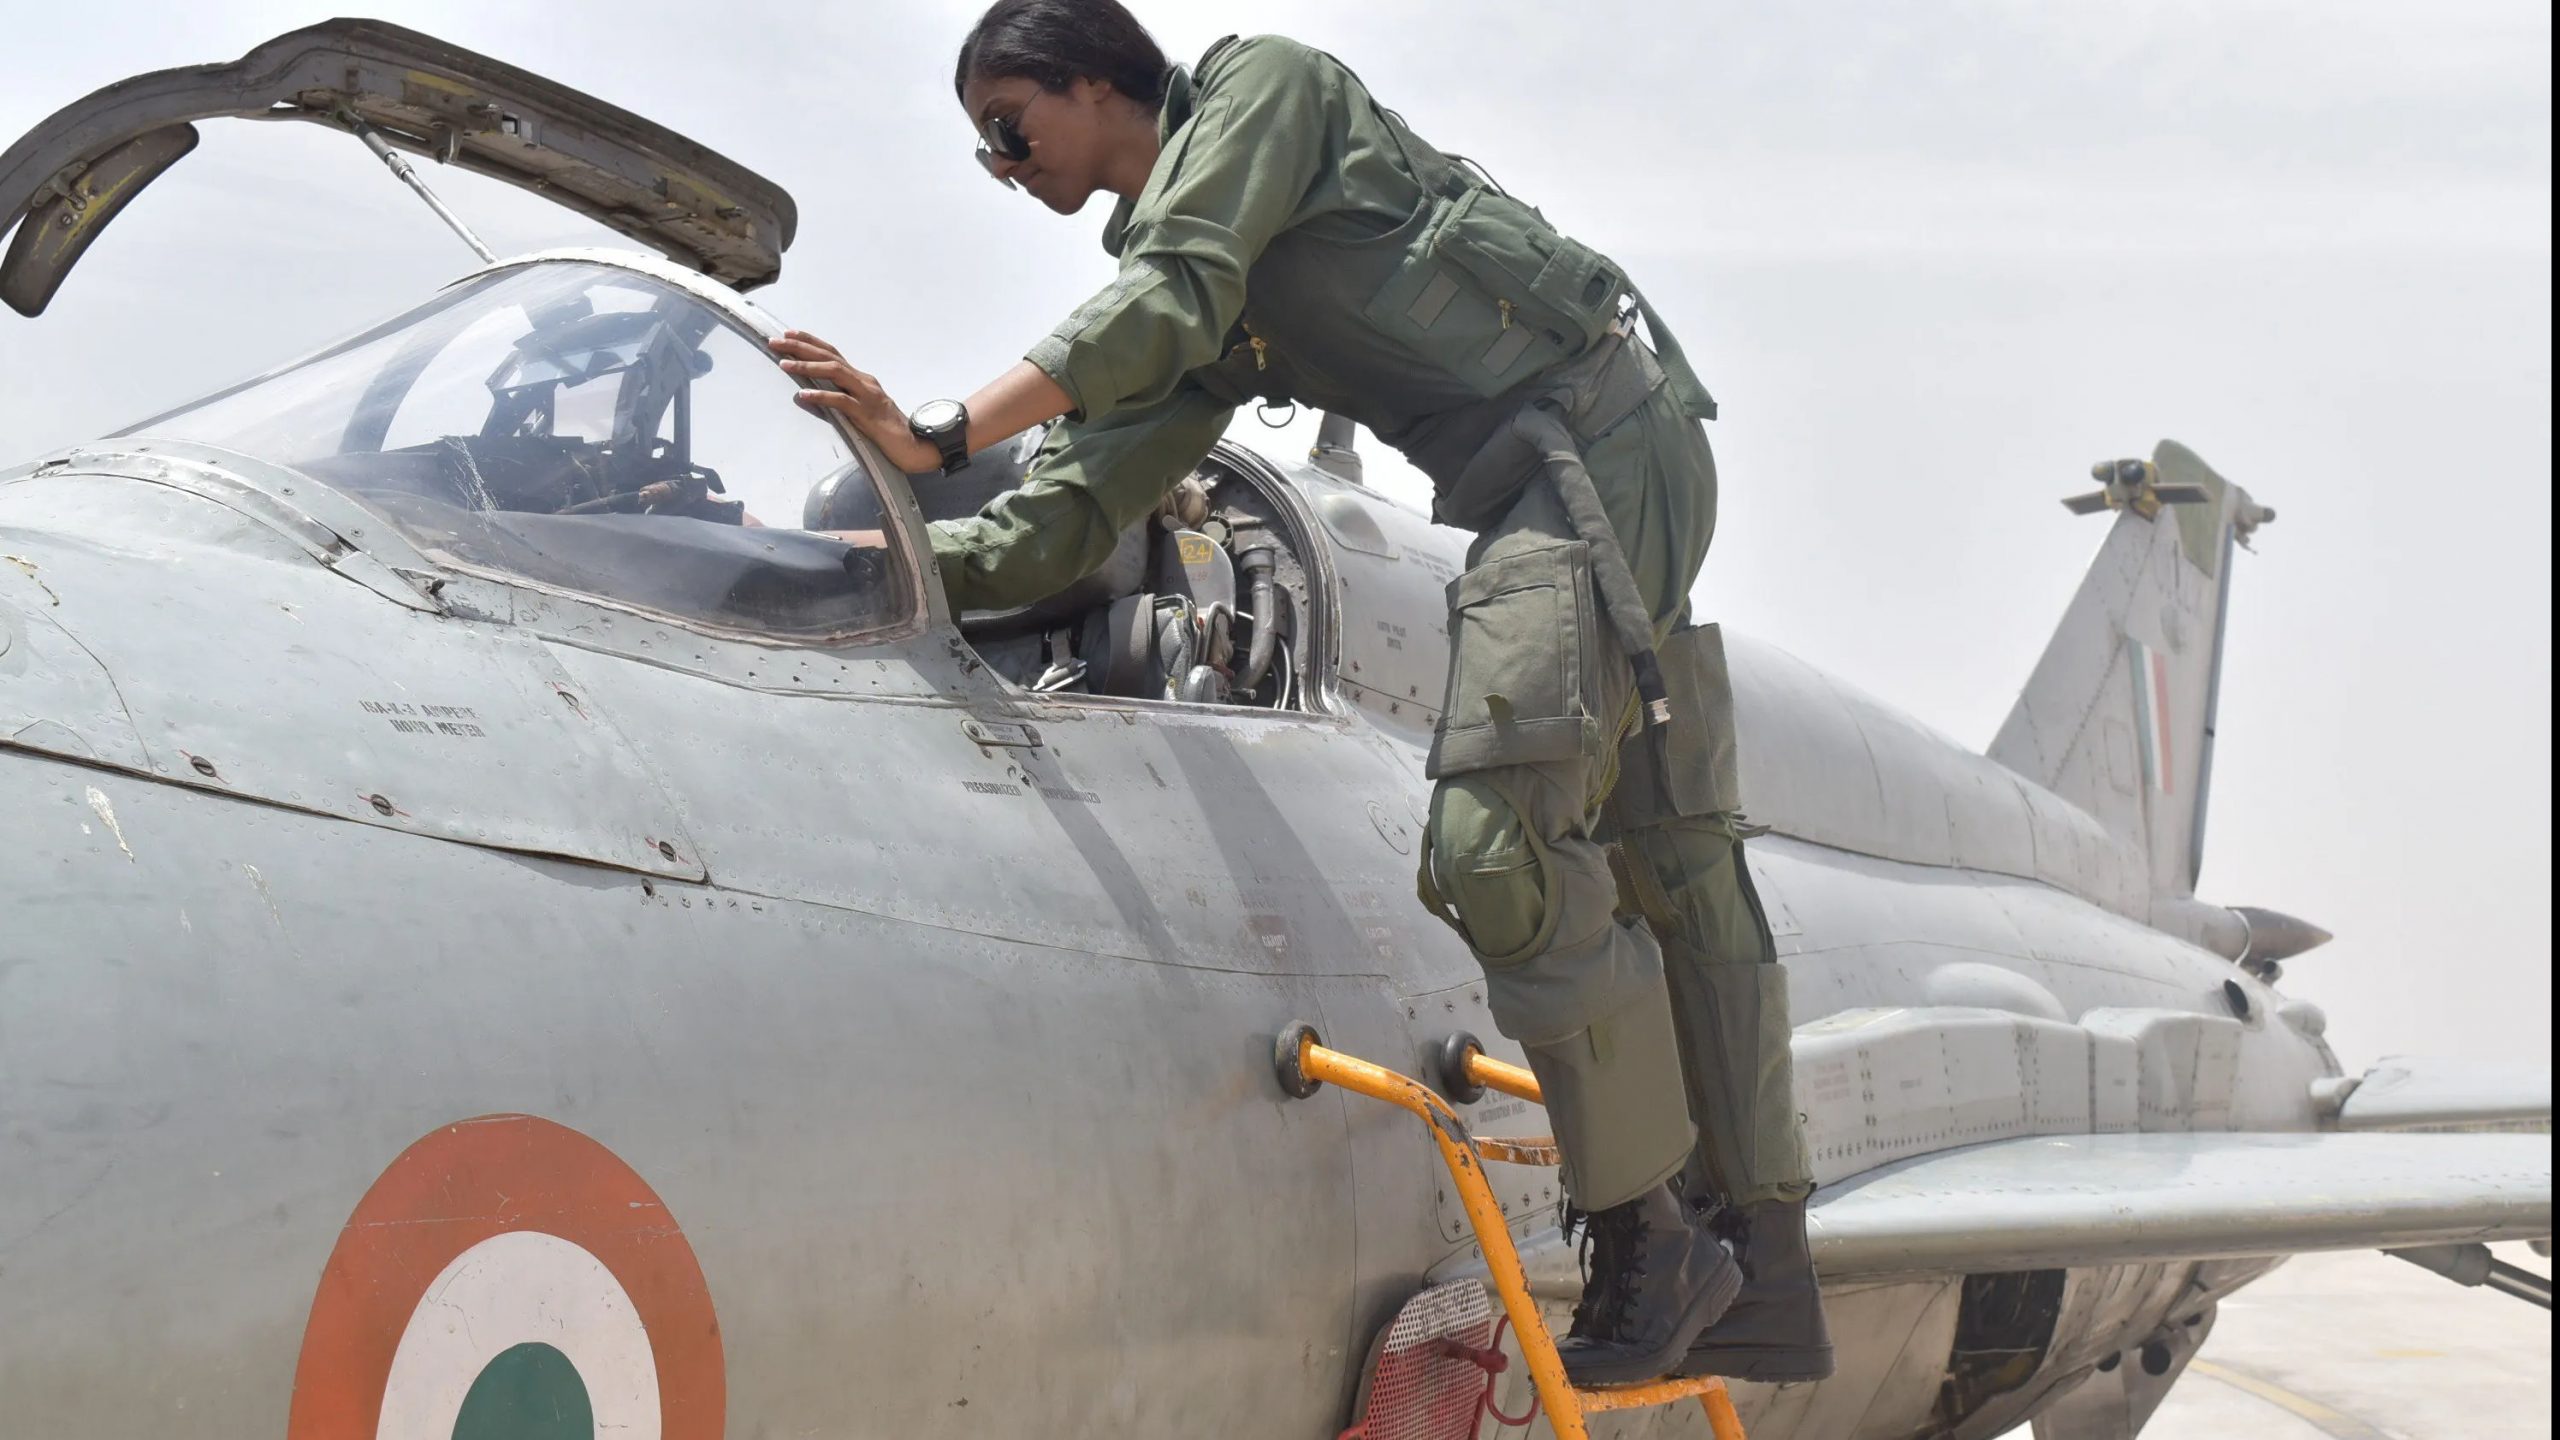 Flight Lt Bhawana Kanth becomes first woman fighter pilot to take part in Republic Day parade